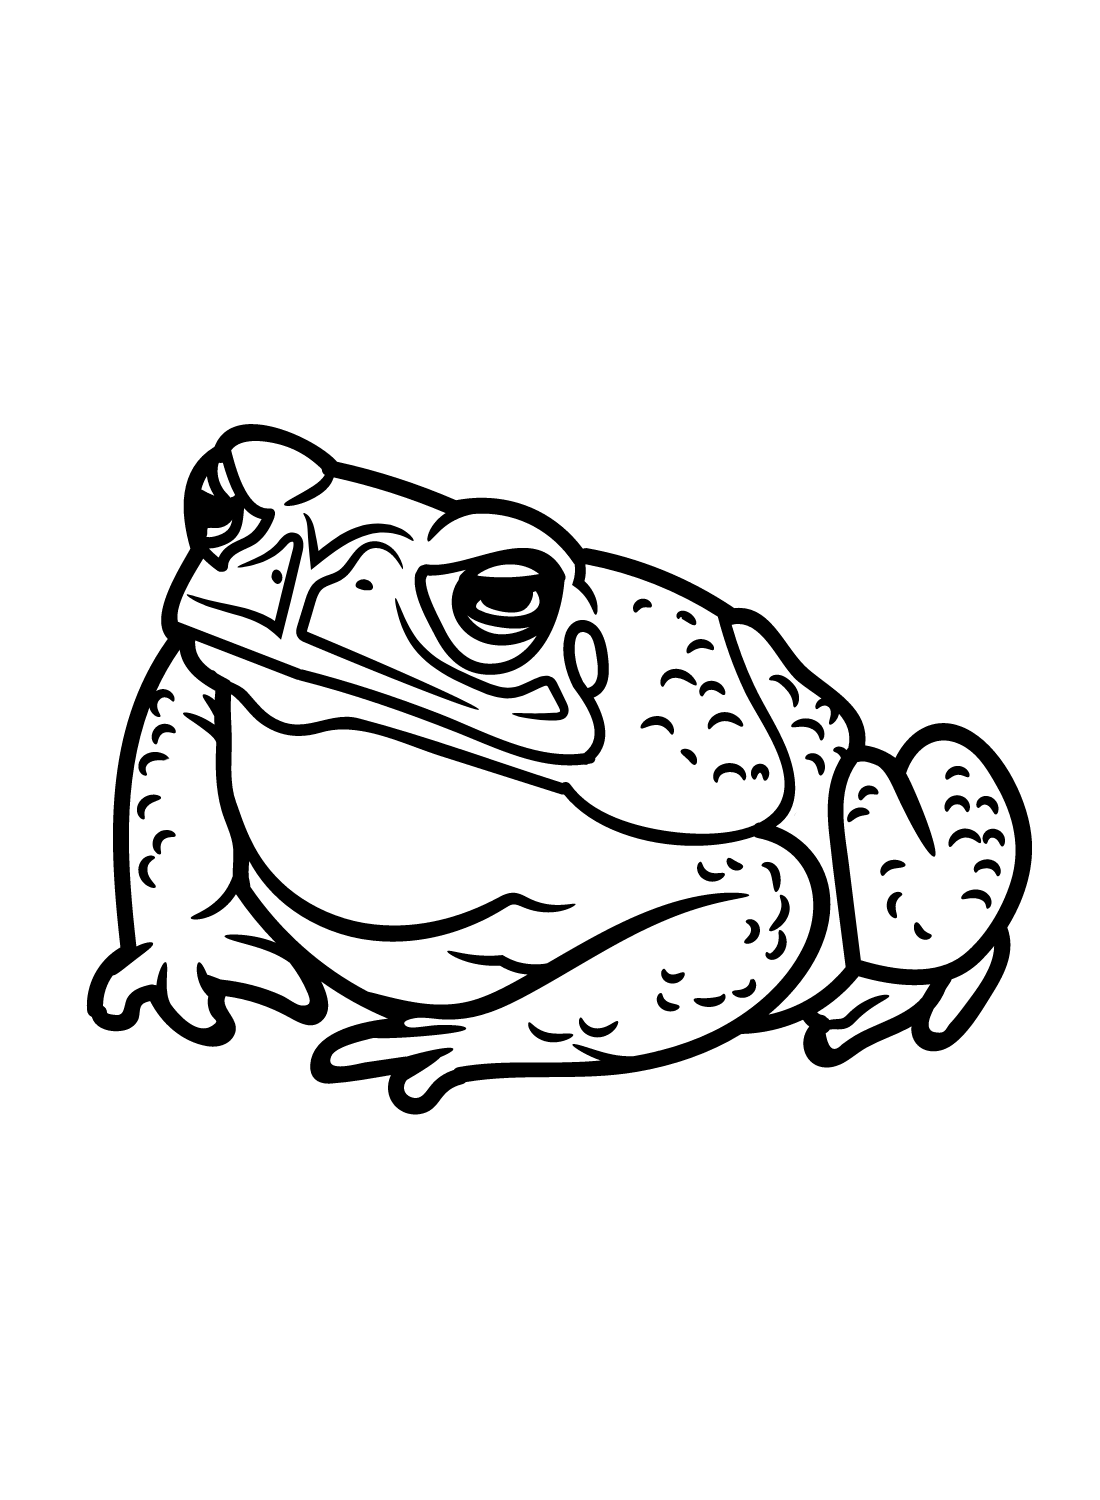 Angry Toad from Toad